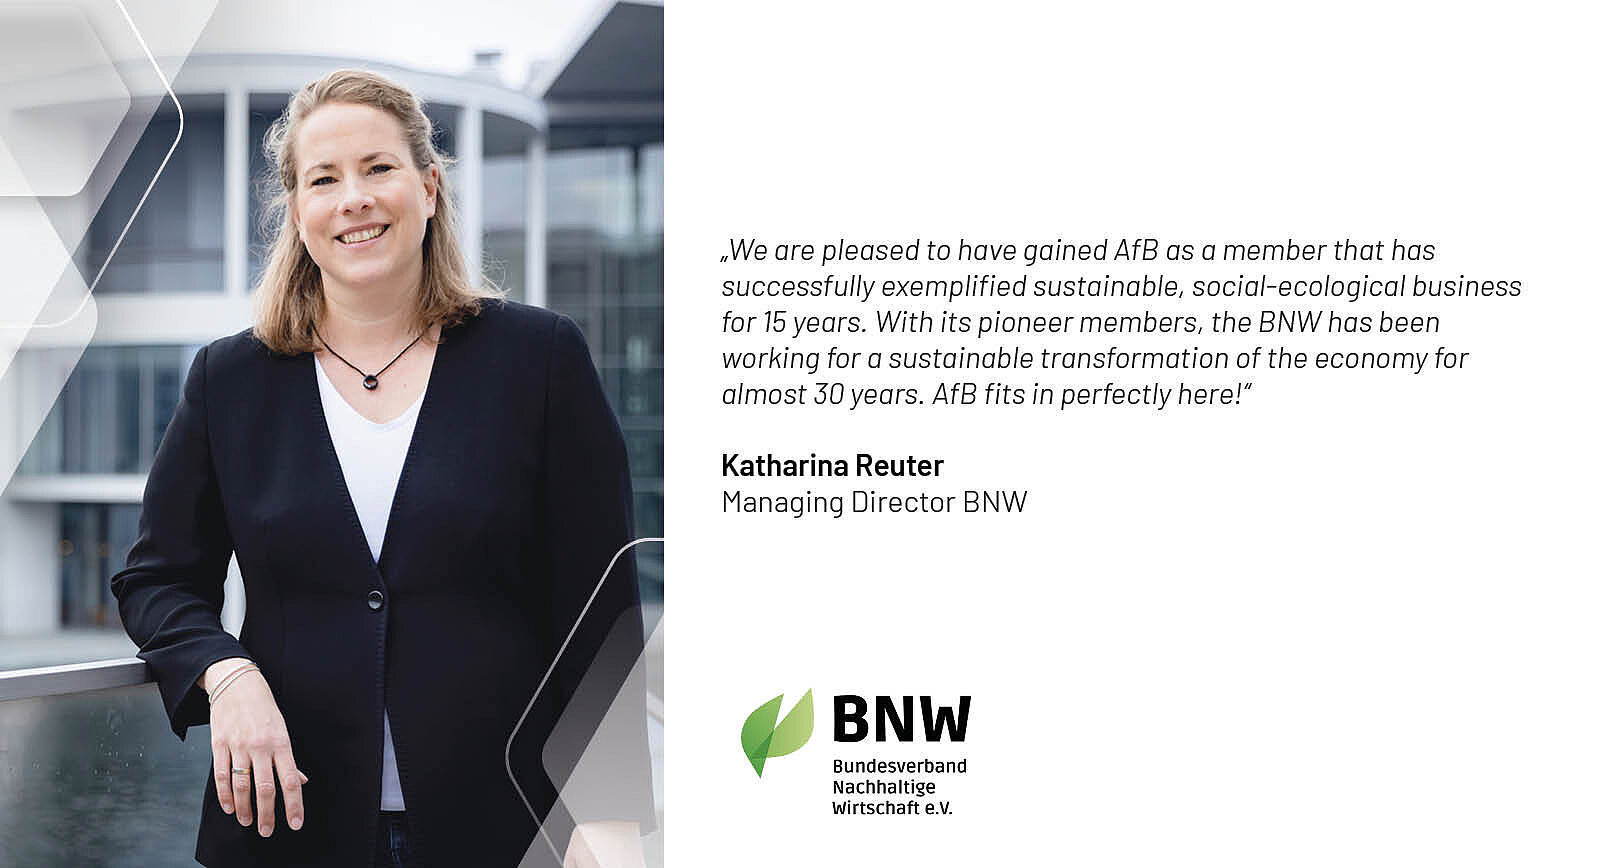 Katharina Reuter, Managing Director of BNW, leans against a railing. She has medium-length blonde hair and is wearing a black blazer. Next to it is her quote with the BNW logo: We are pleased to have gained AfB as a member that has successfully exemplified sustainable, social-ecological business for 15 years. With its pioneer members, the BNW has been working for a sustainable transformation of the economy for almost 30 years. AfB fits in perfectly here!